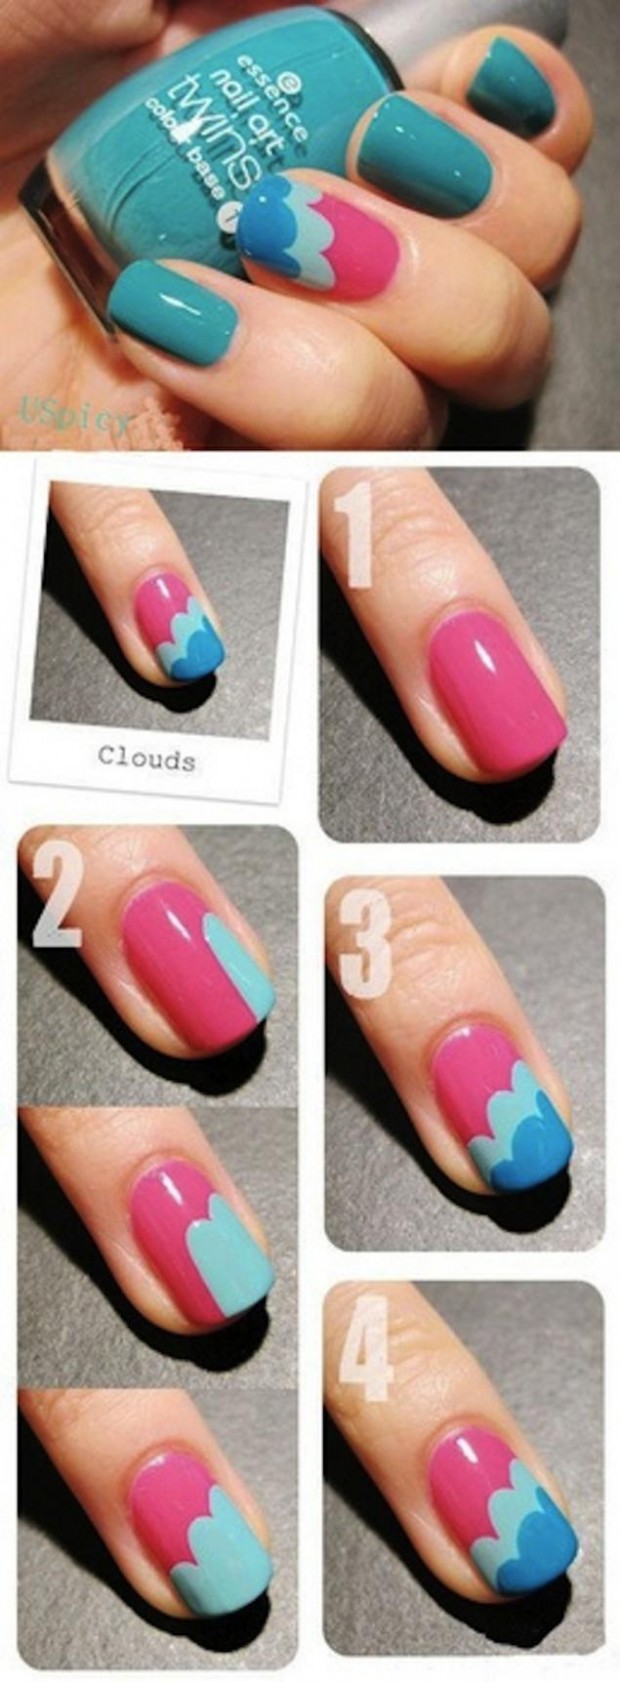 general-nail-design-tutorials-magnificent-clouds-nail-art-tutorial-with-soft-and-dark-blue-polish-colors-on-pink-nails-nail-art-tutorial